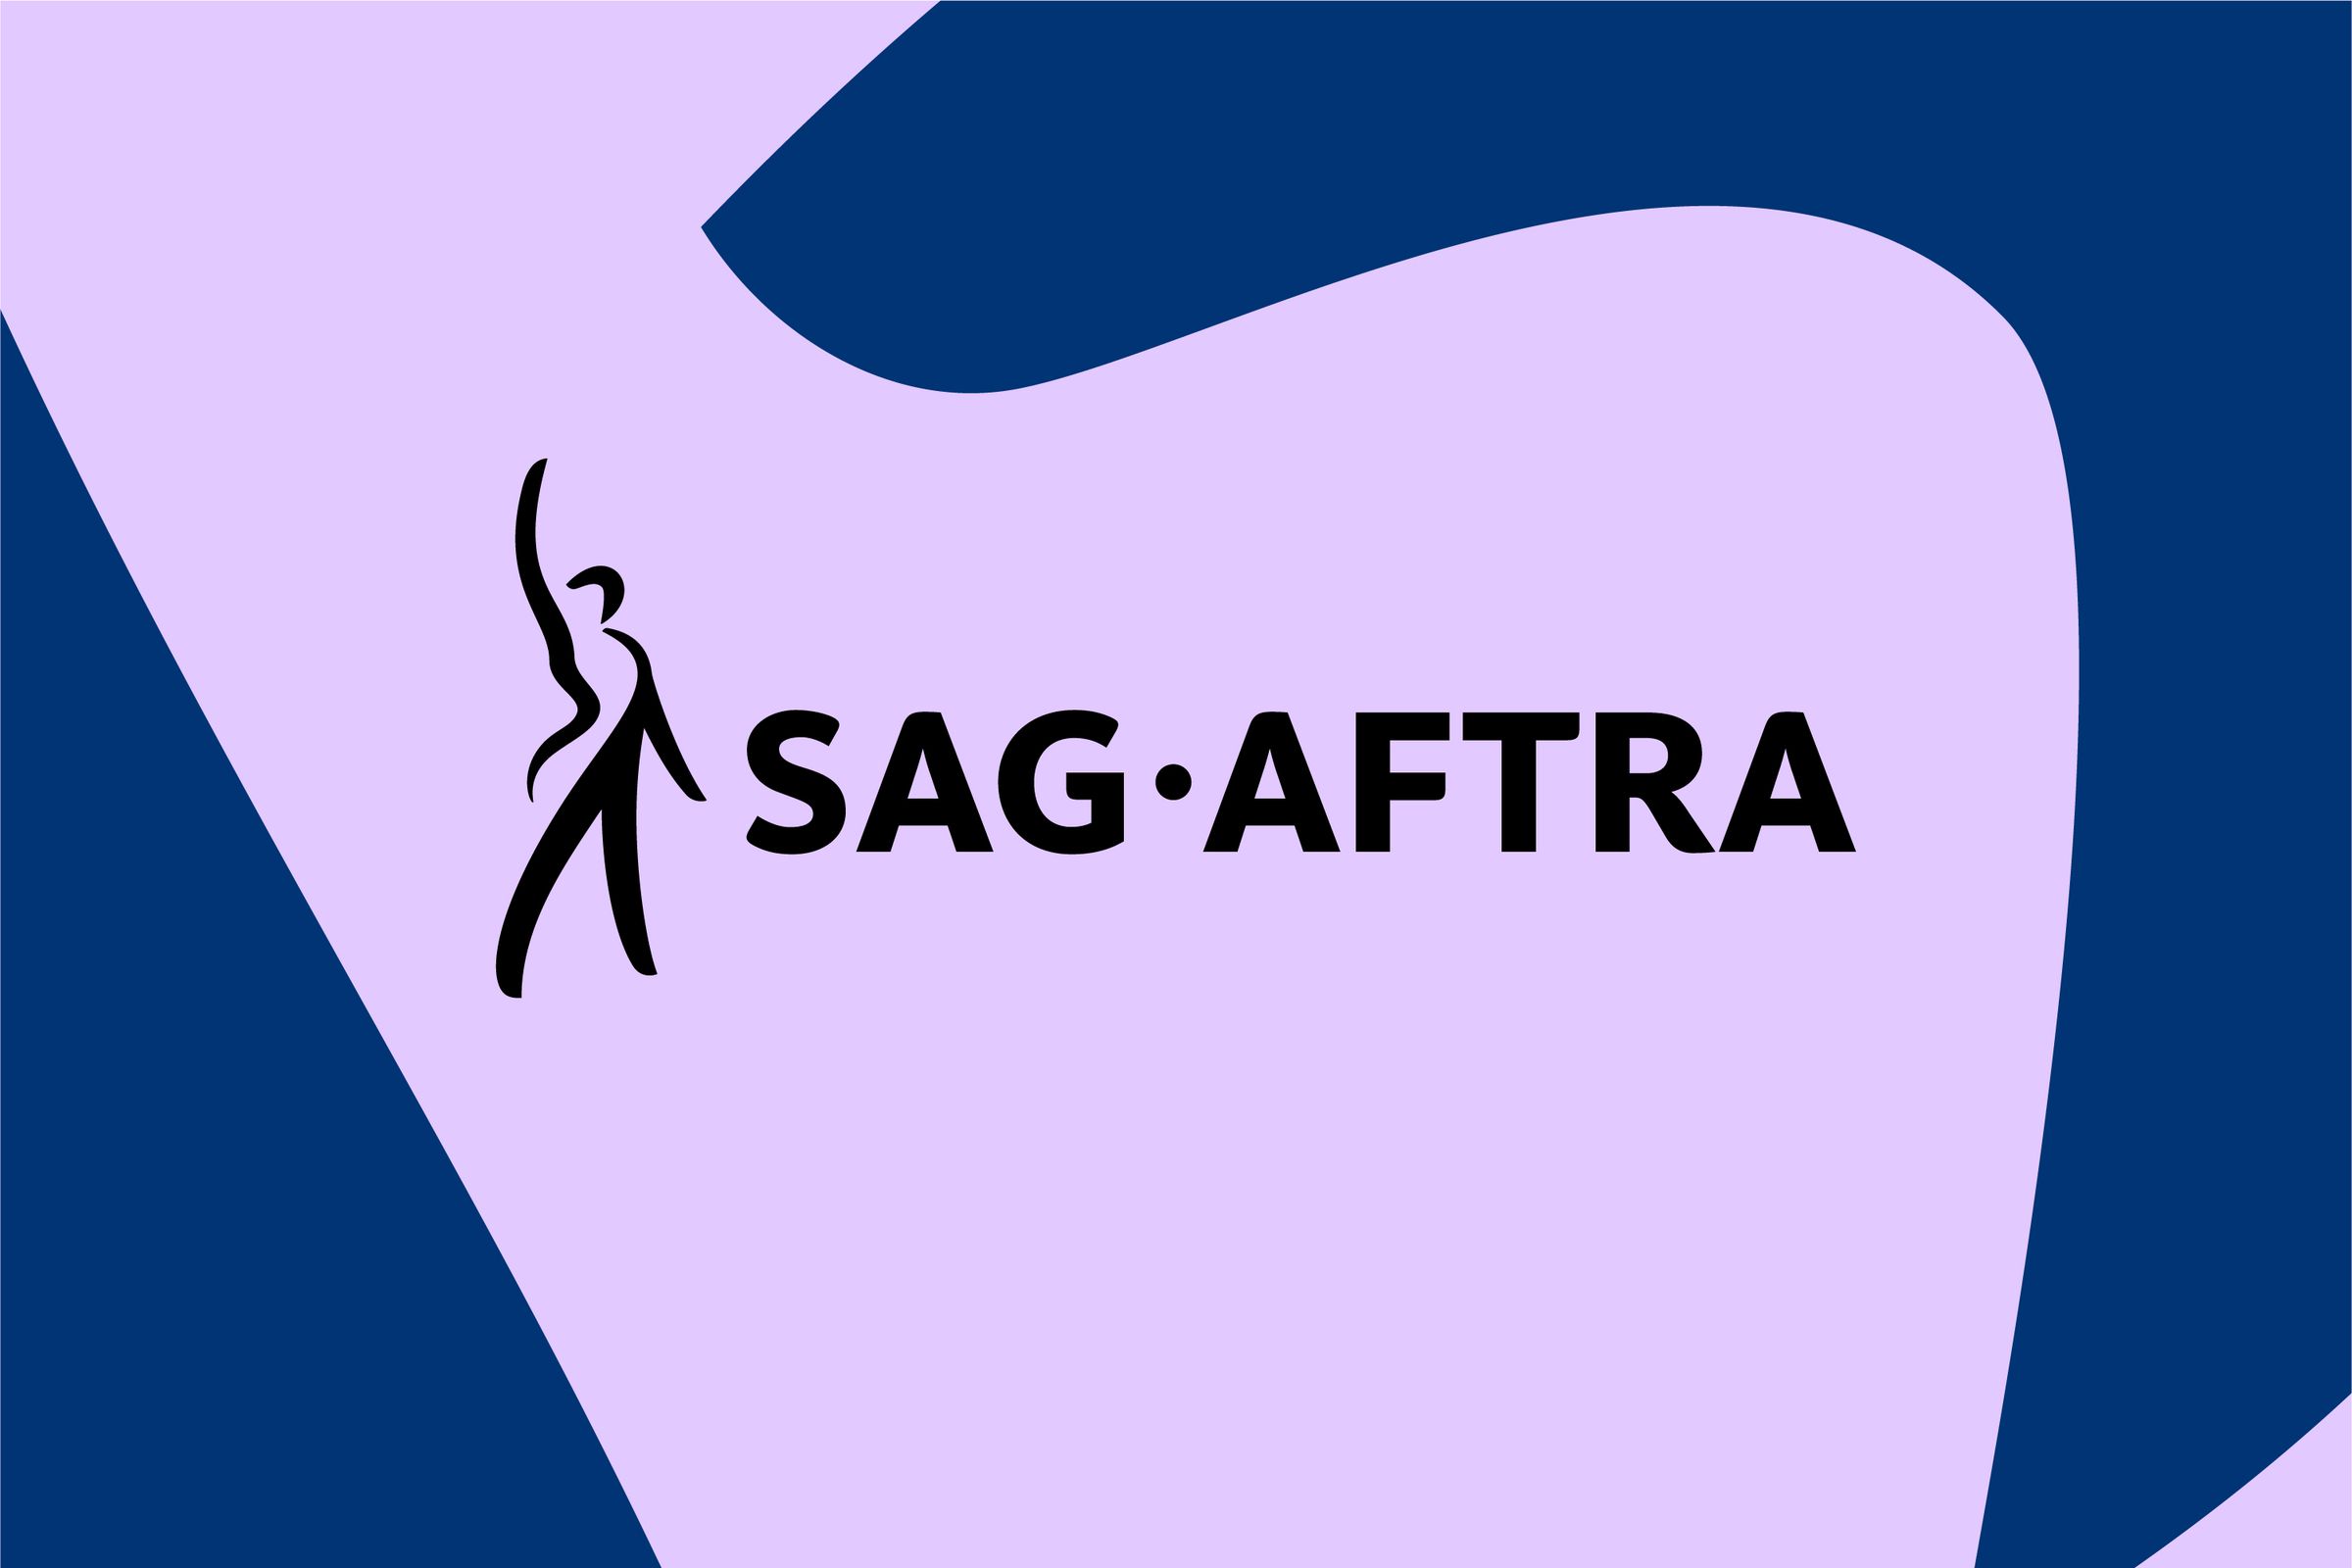 The SAG-AFTRA logo on a two-tone purple background.